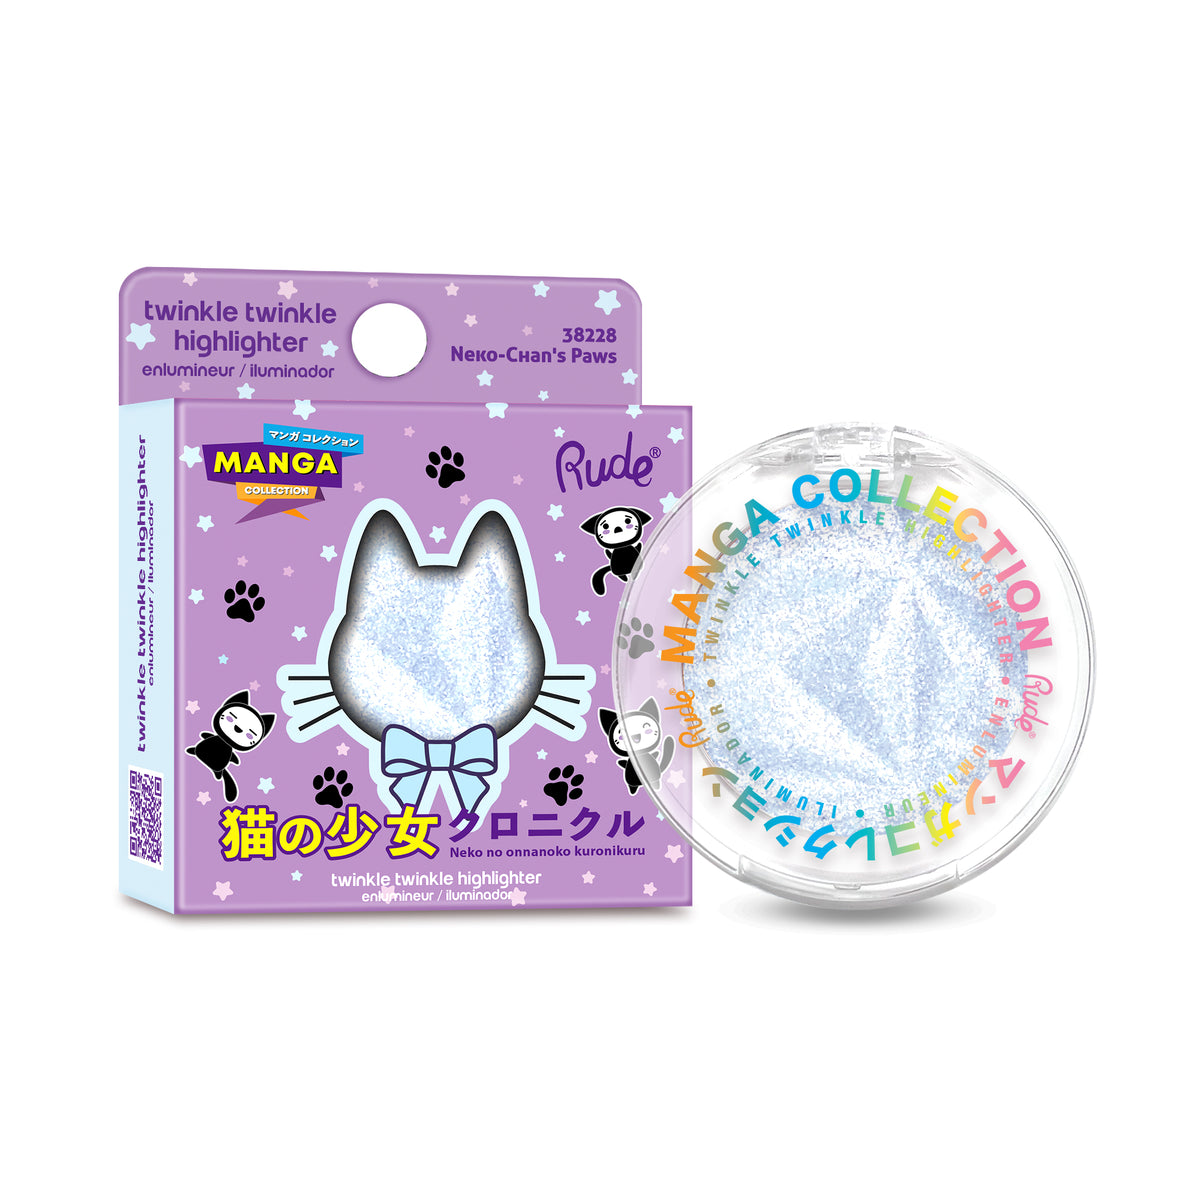 Manga Collection Twinkle Twinkle Highlighter - Neko-Chan's Paws